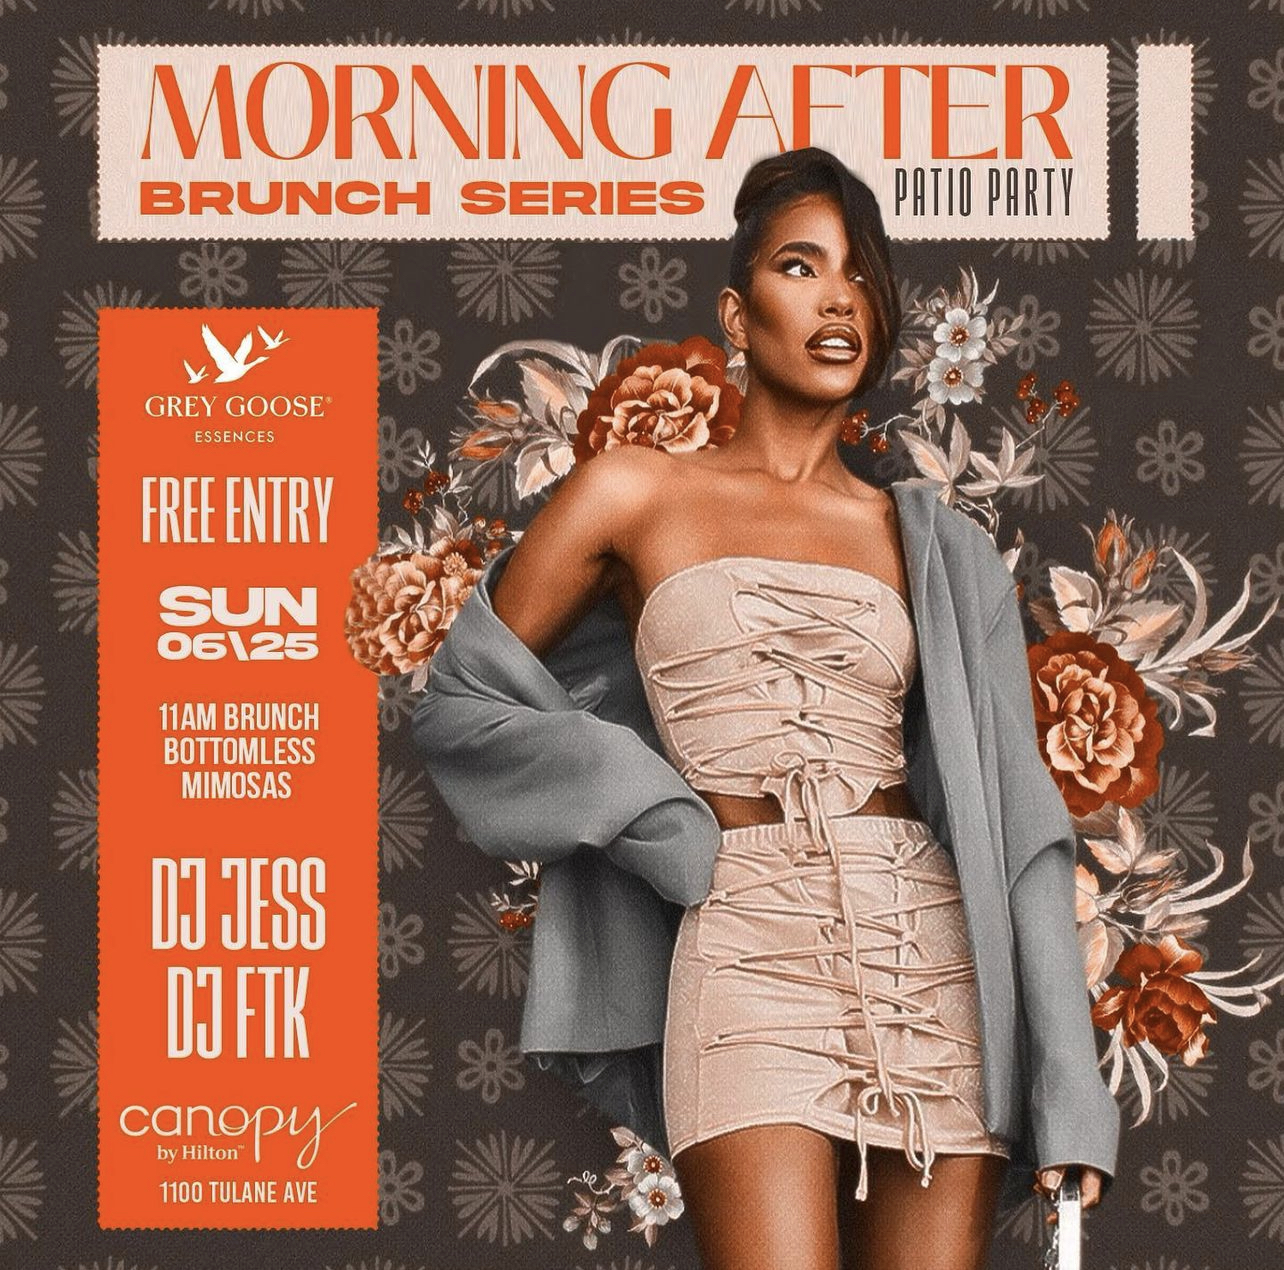 Flyer for Morning After Brunch Series Patio Party